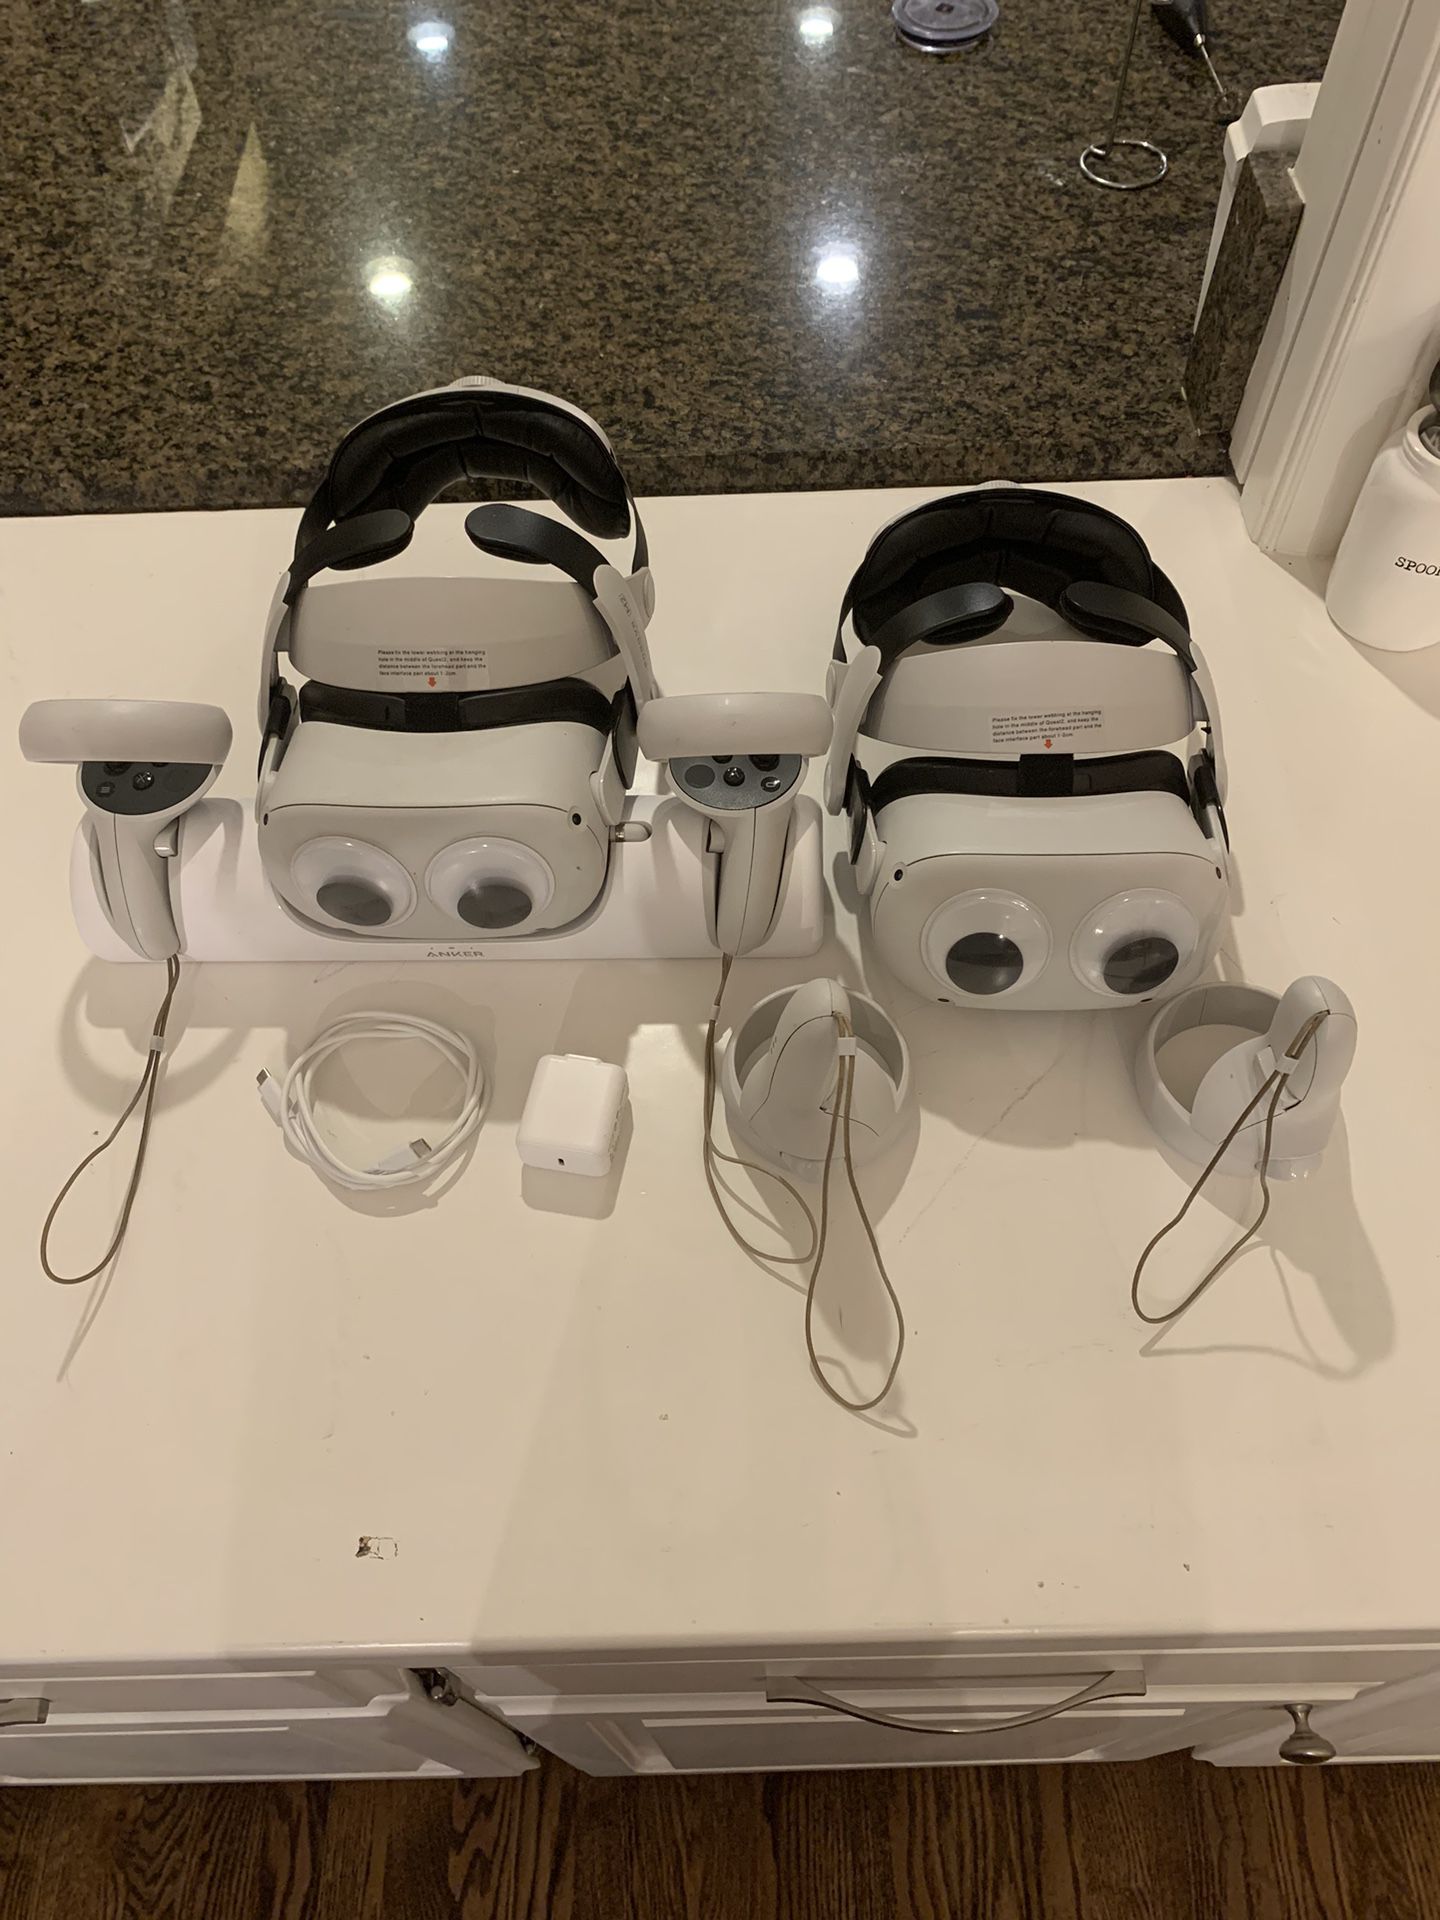 2 Oculus Quest 2 Headsets, Controllers, Anker Dock